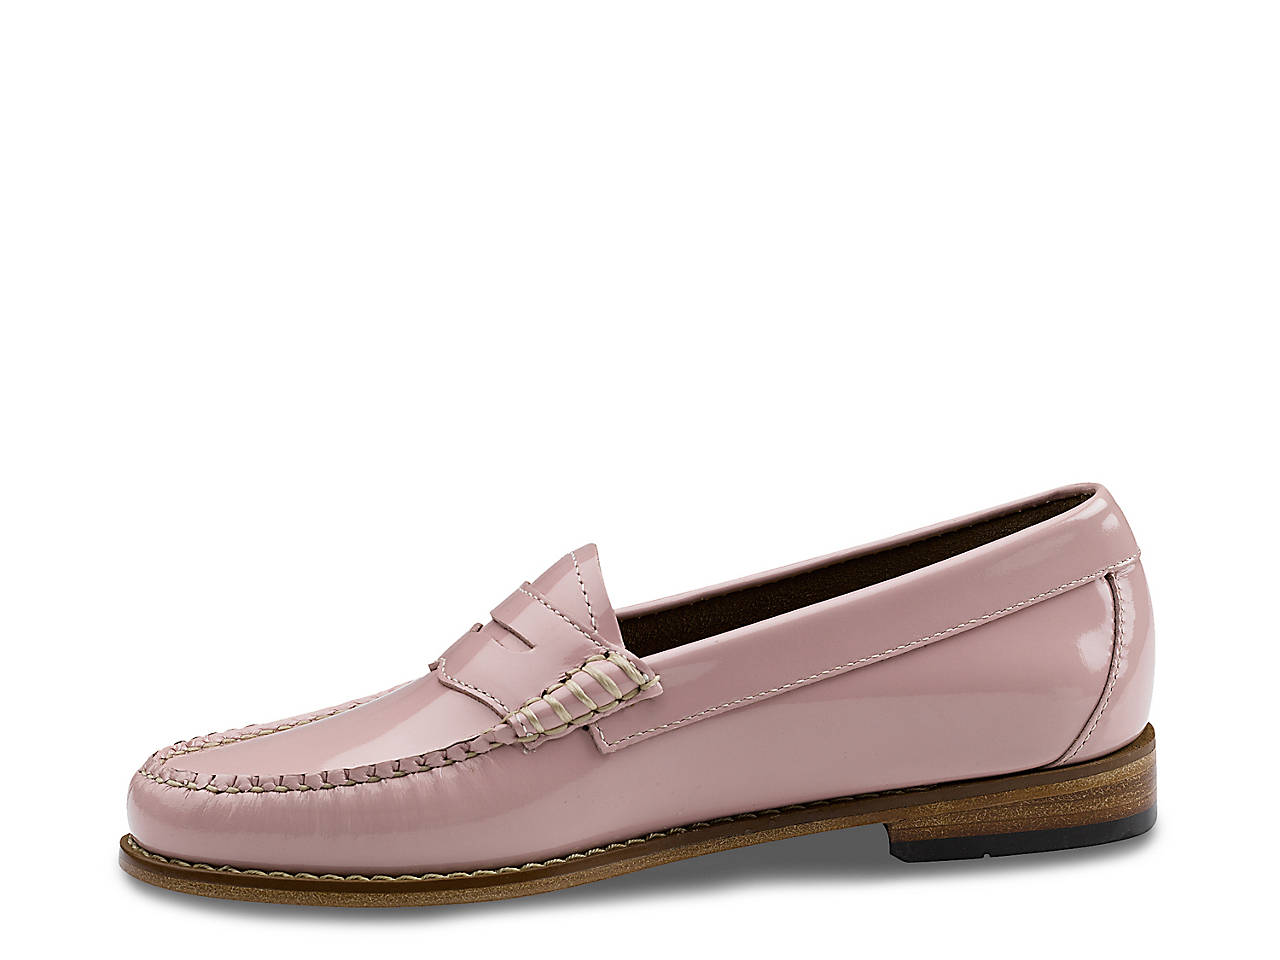 G.H. Bass & Co. Whitney Weejuns Patent Loafer Women's Shoes | DSW